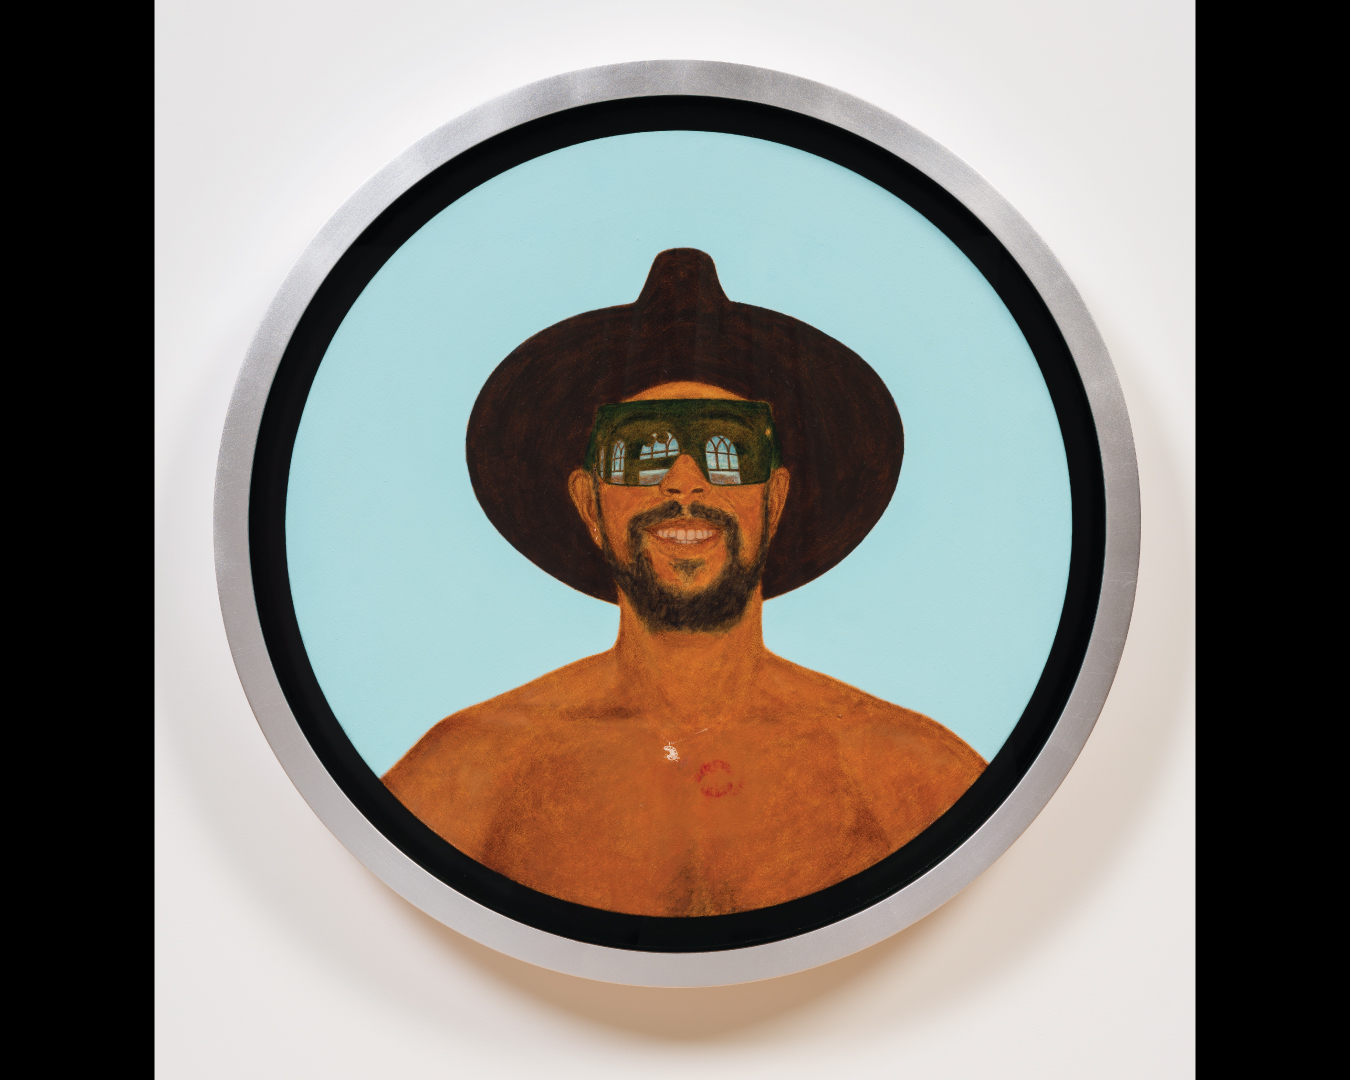 Circular self-portrait of Barkley L. Hendricks wearing sunglasses, a black hat, and a chain with a palette around his neck, with a blue background